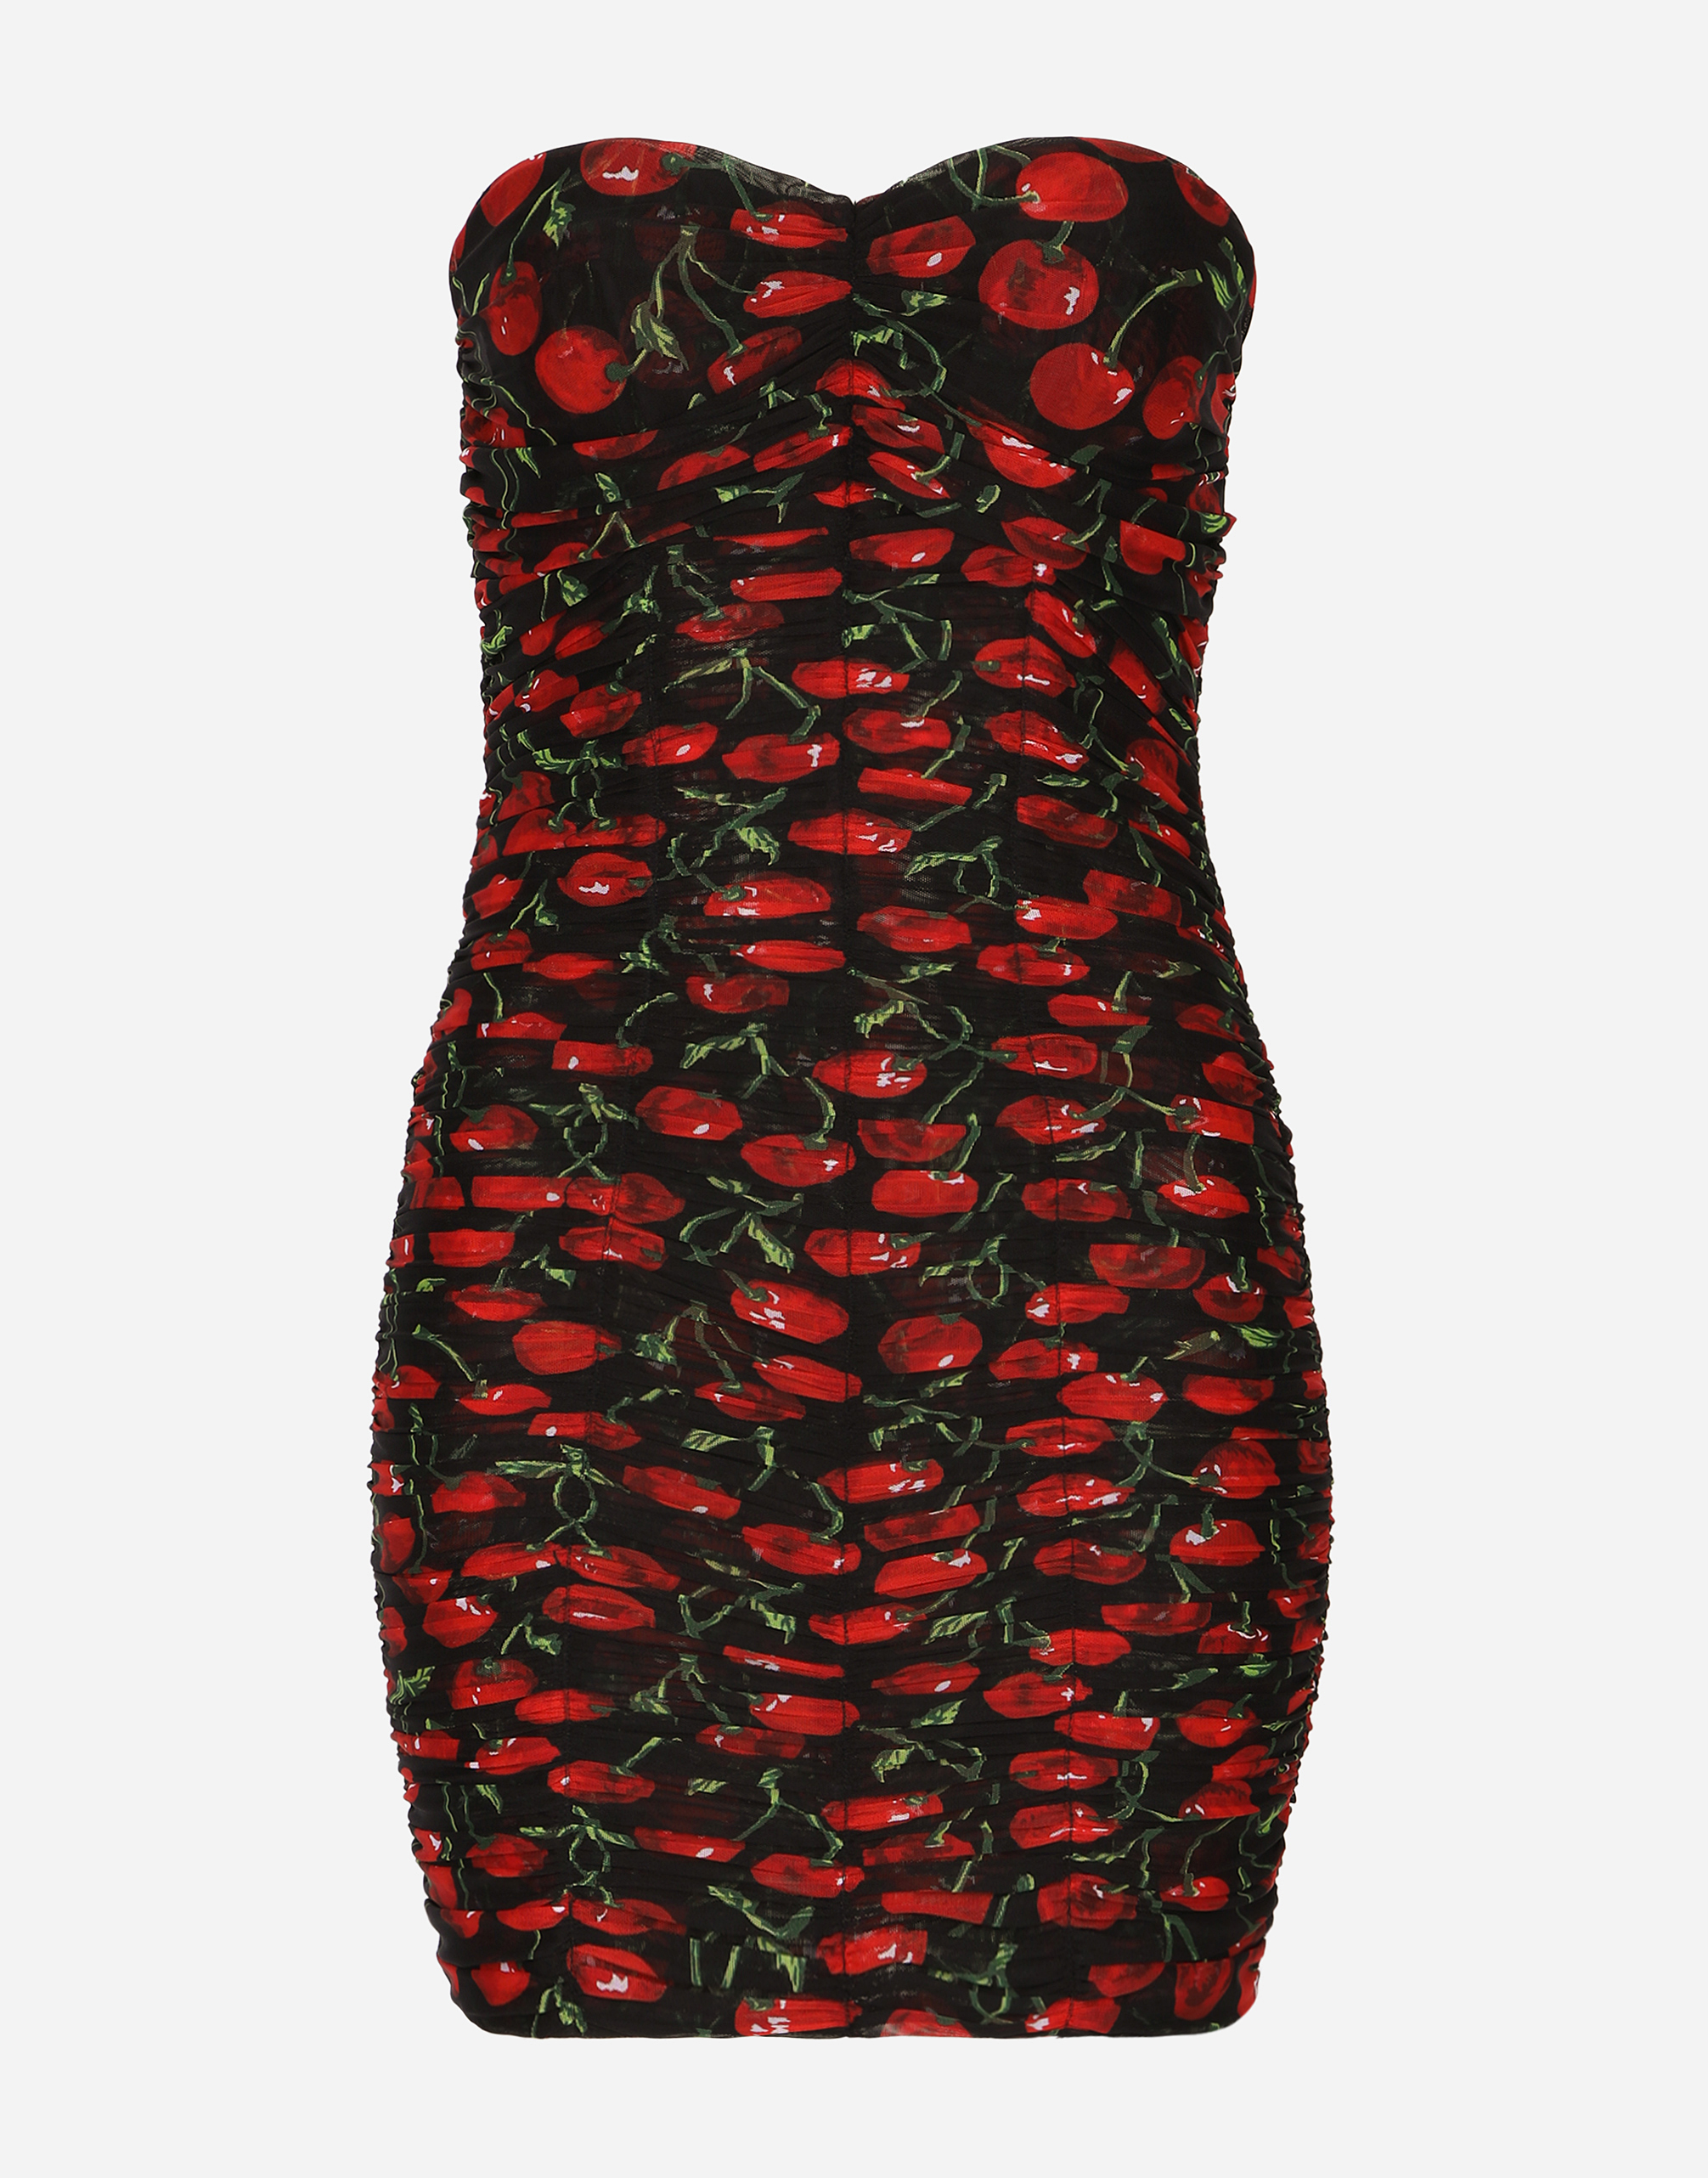 DOLCE & GABBANA CHERRY-PRINT TULLE STRAPLESS DRESS WITH DRAPING